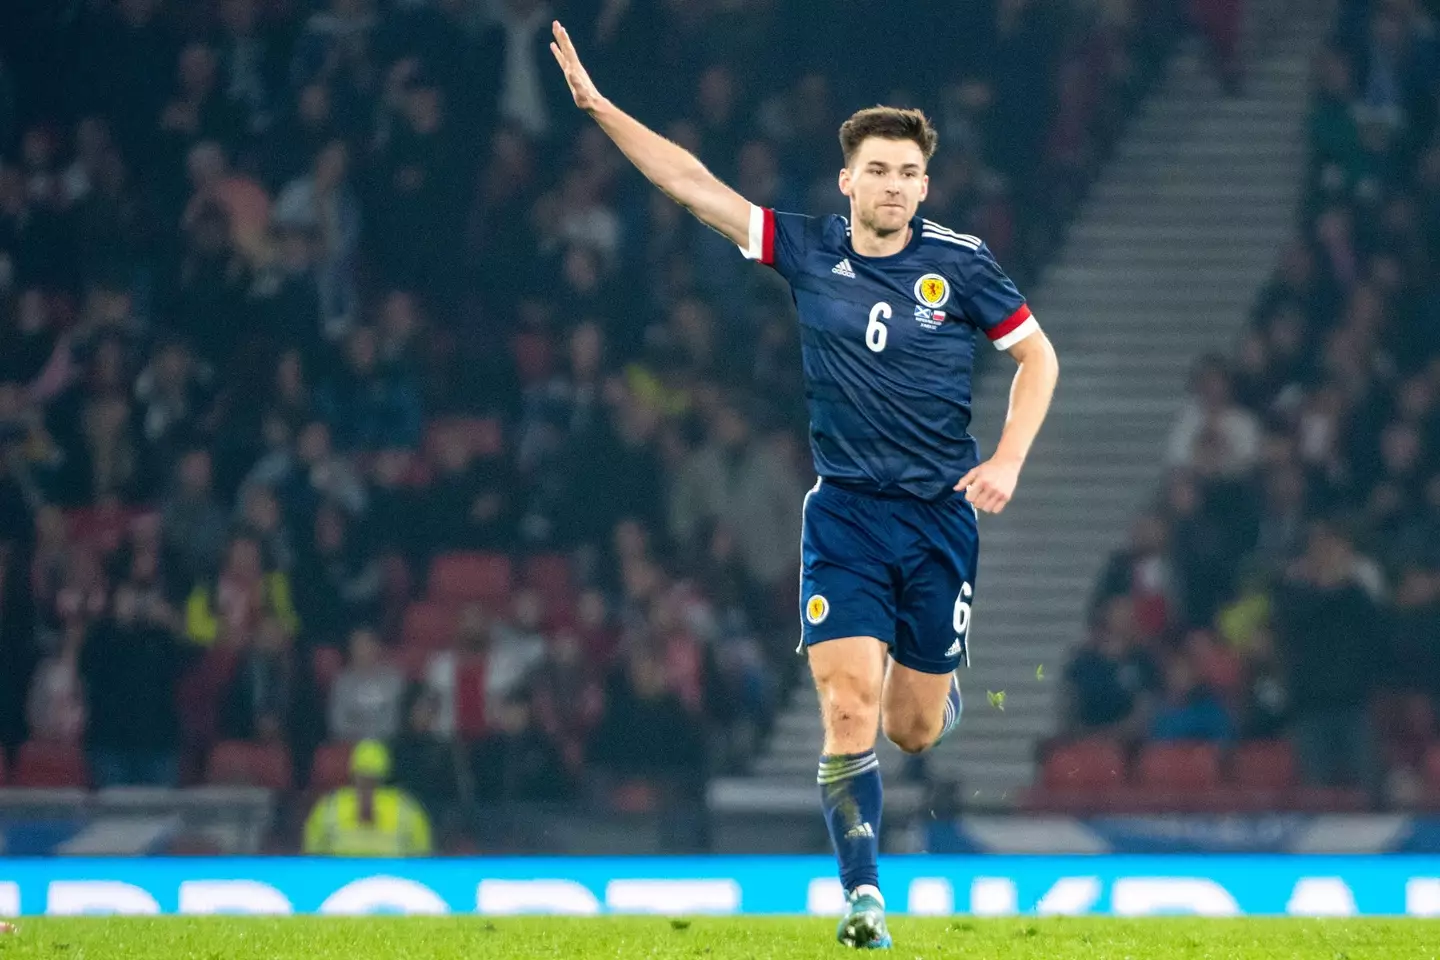 Kieran Tierney of Scotland celebrates scoring during the International Friendly Match between Scotland and Poland at Hampden Park in Glasgow, Scotland on March 24, 2022 (Photo by Andrew Surma/